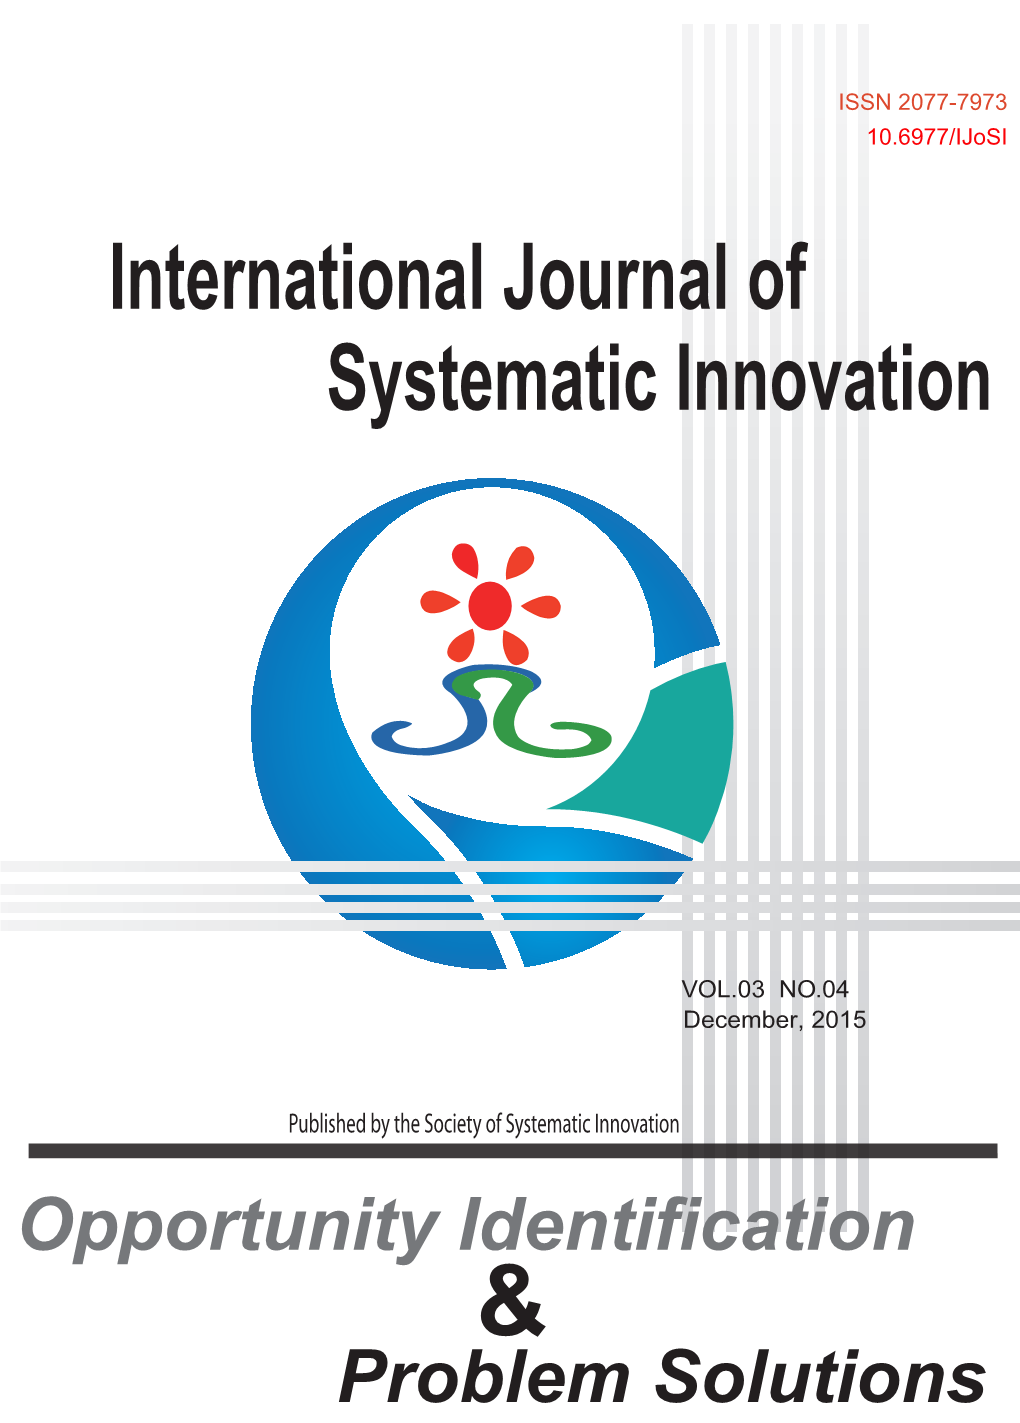 International Journal of Systematic Innovation